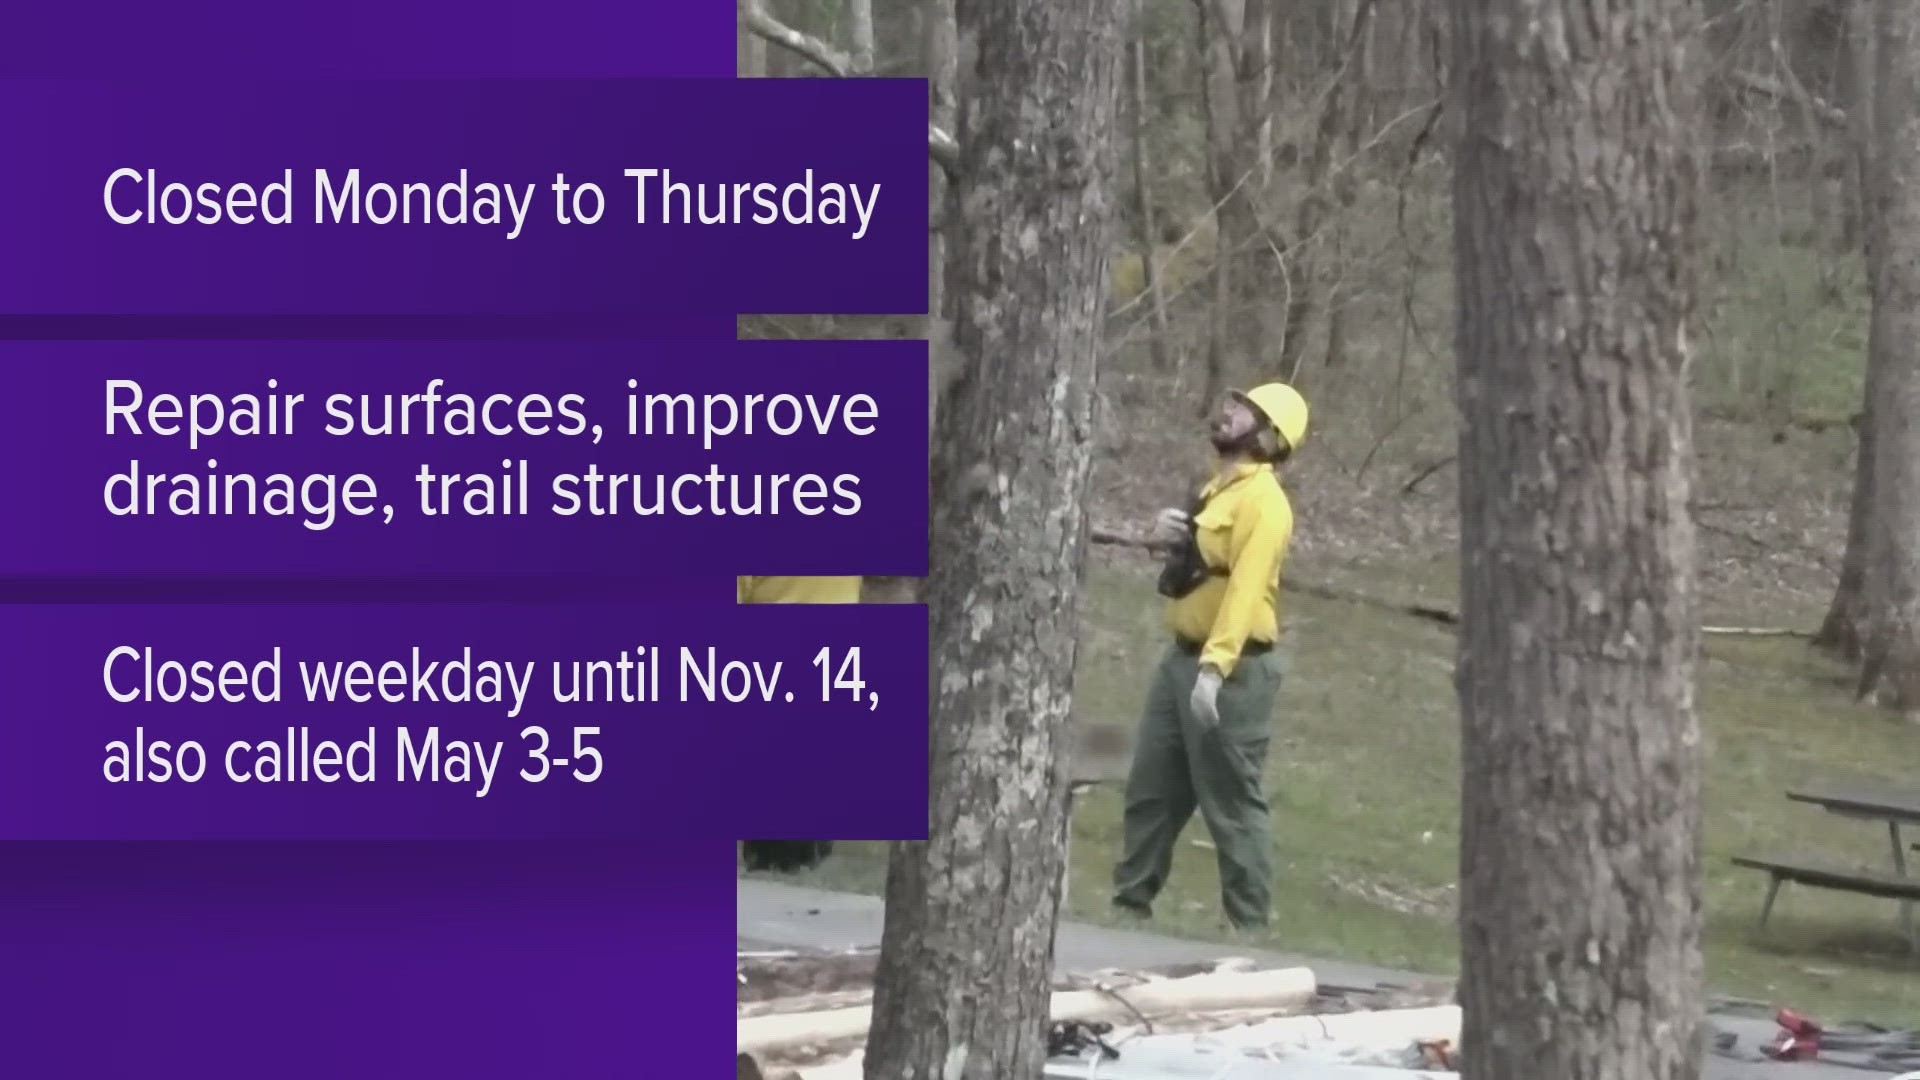 The Ramsey Cascades Trail will be closed on weekdays from April 15 to Nov. 14 for rehabilitation work.